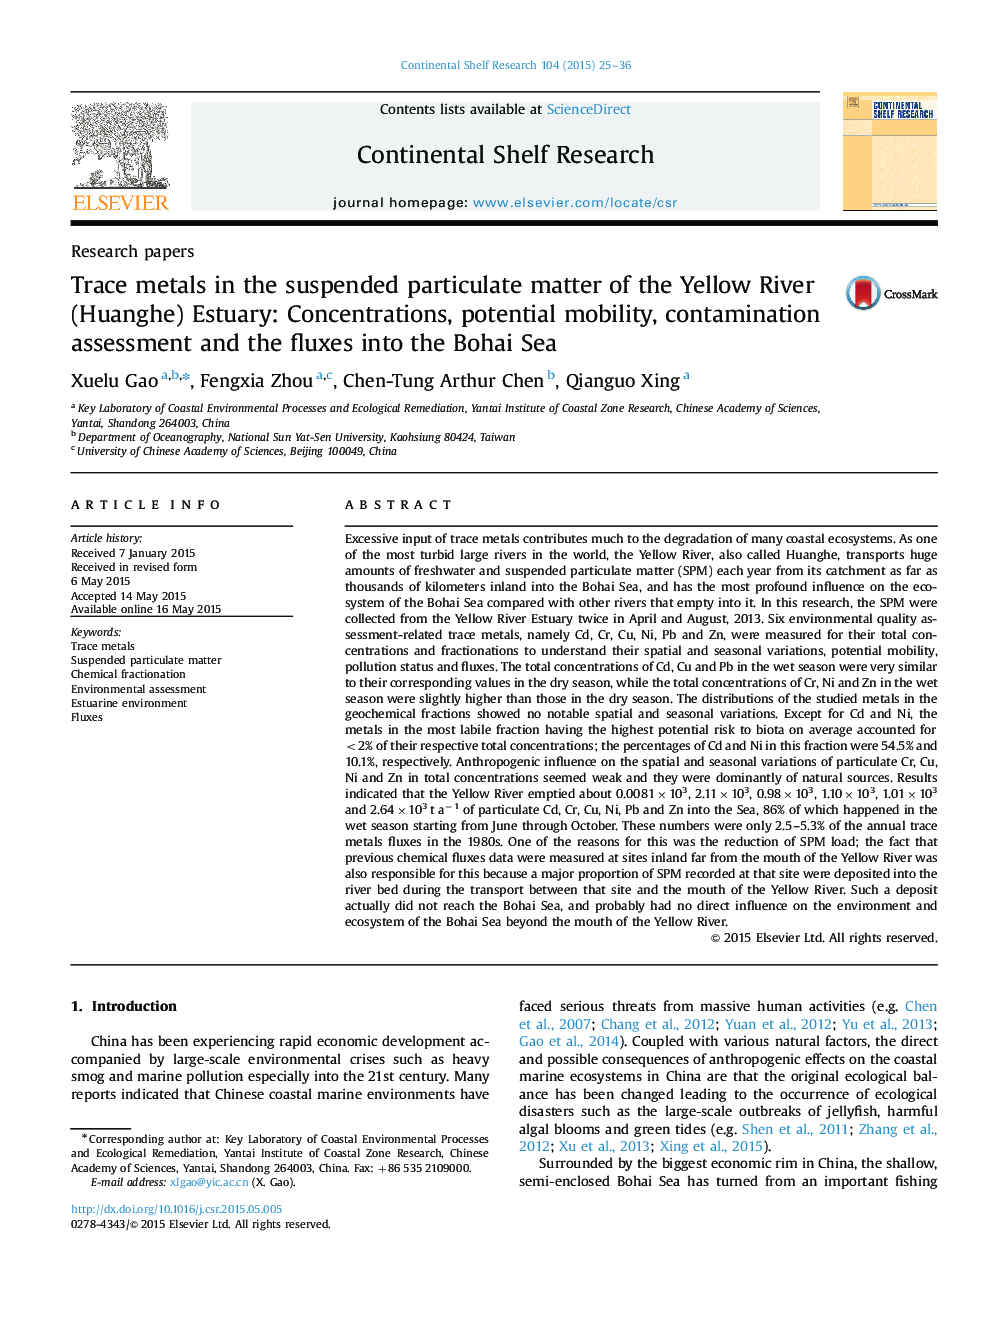 Trace metals in the suspended particulate matter of the Yellow River (Huanghe) Estuary: Concentrations, potential mobility, contamination assessment and the fluxes into the Bohai Sea